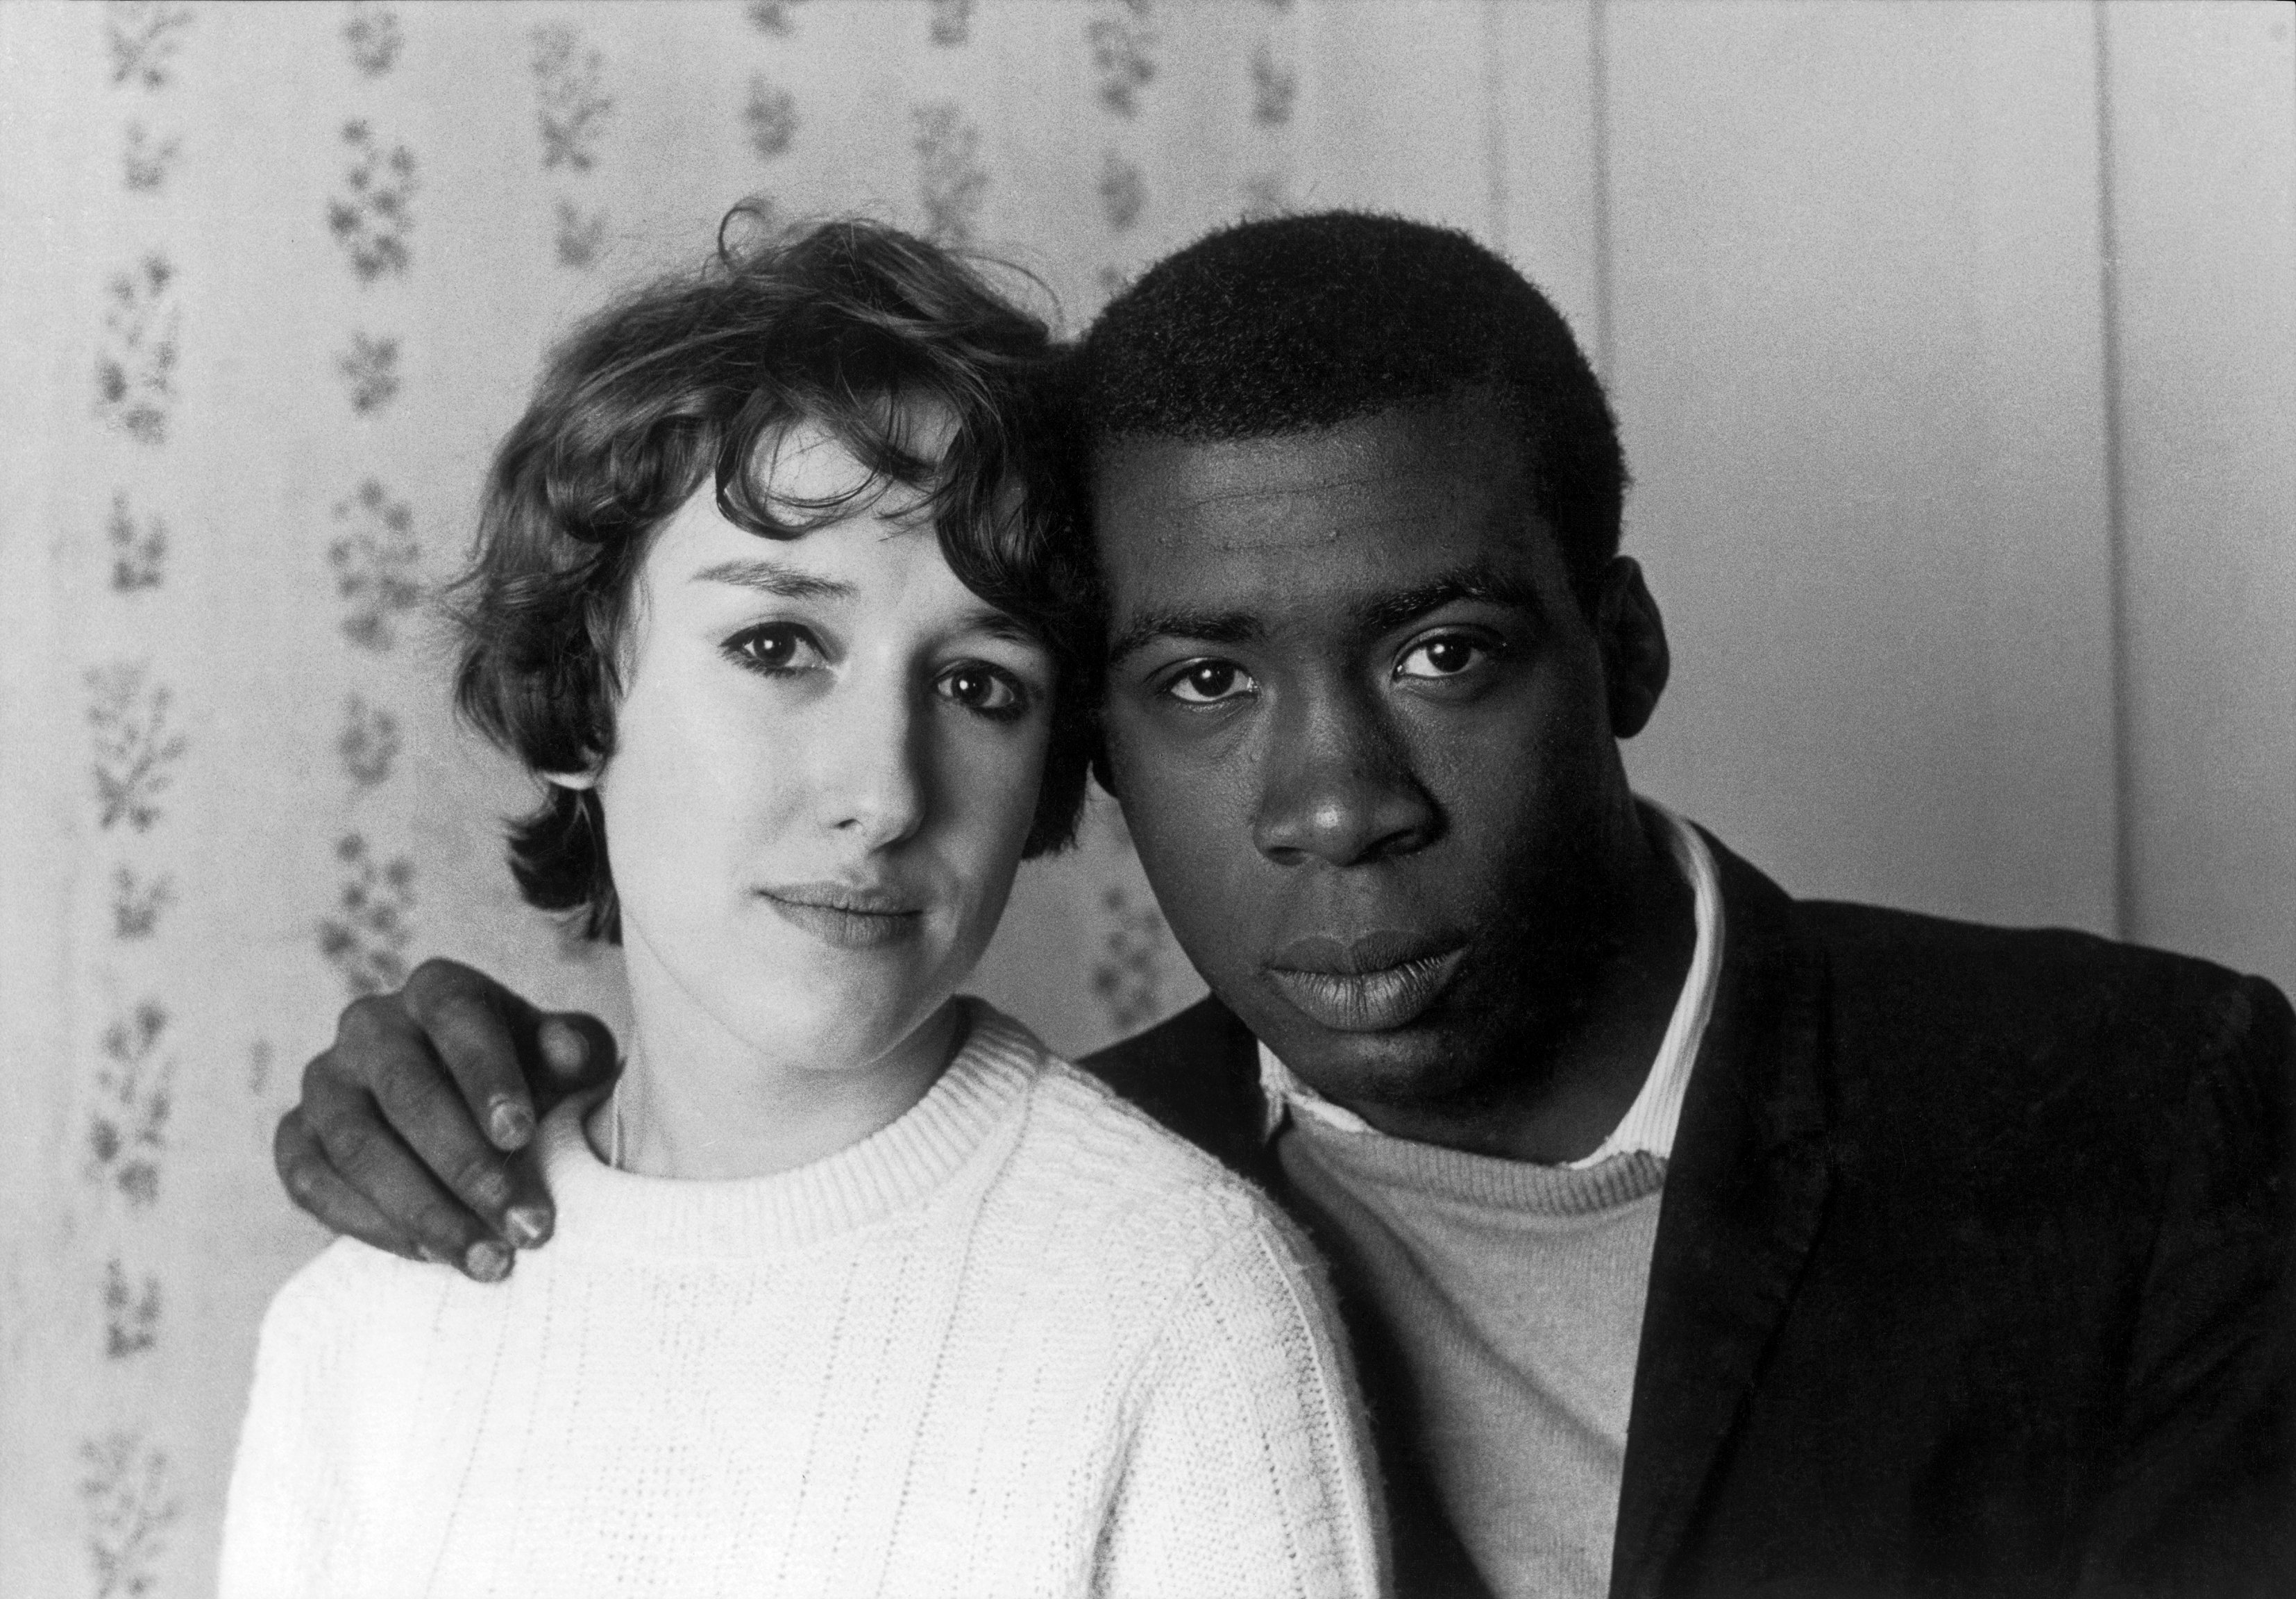 © Charlie Phillips / Notting Hill couple, 1967